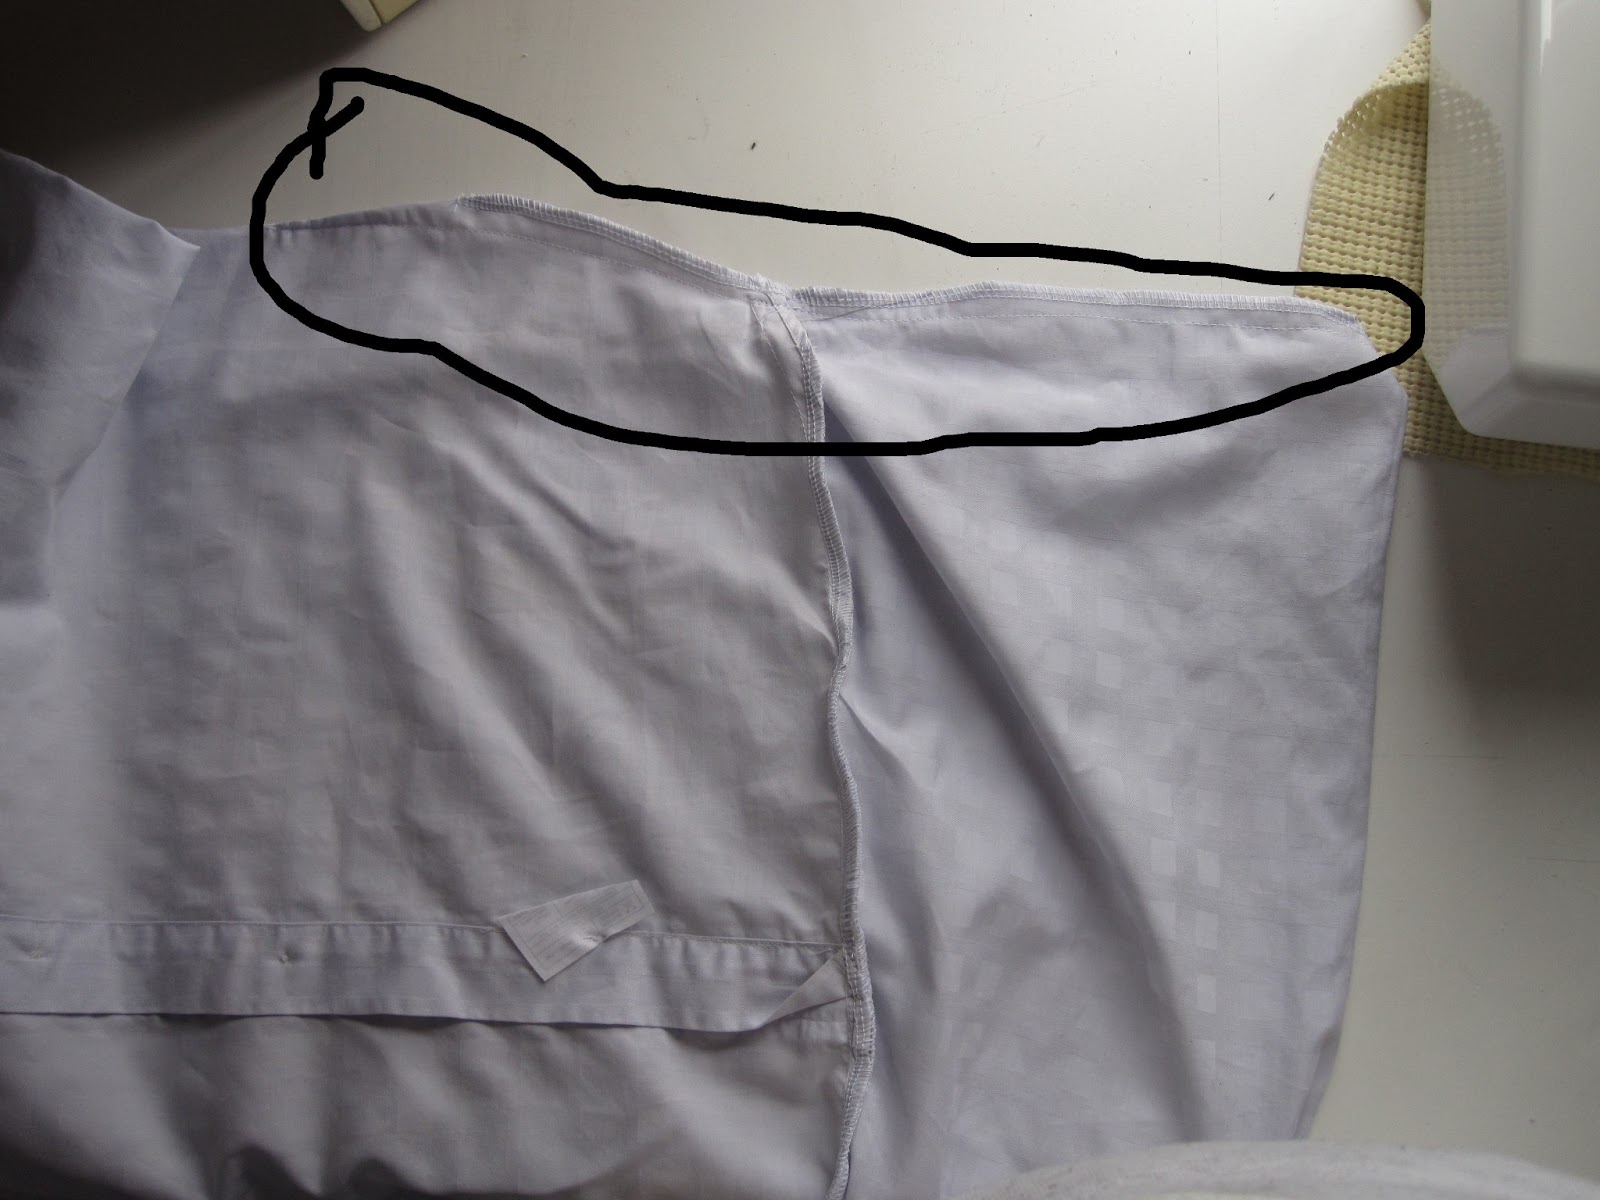 SALUBRIOUS: How to Upcycle and old Men's Shirt into a baby Sleepsack